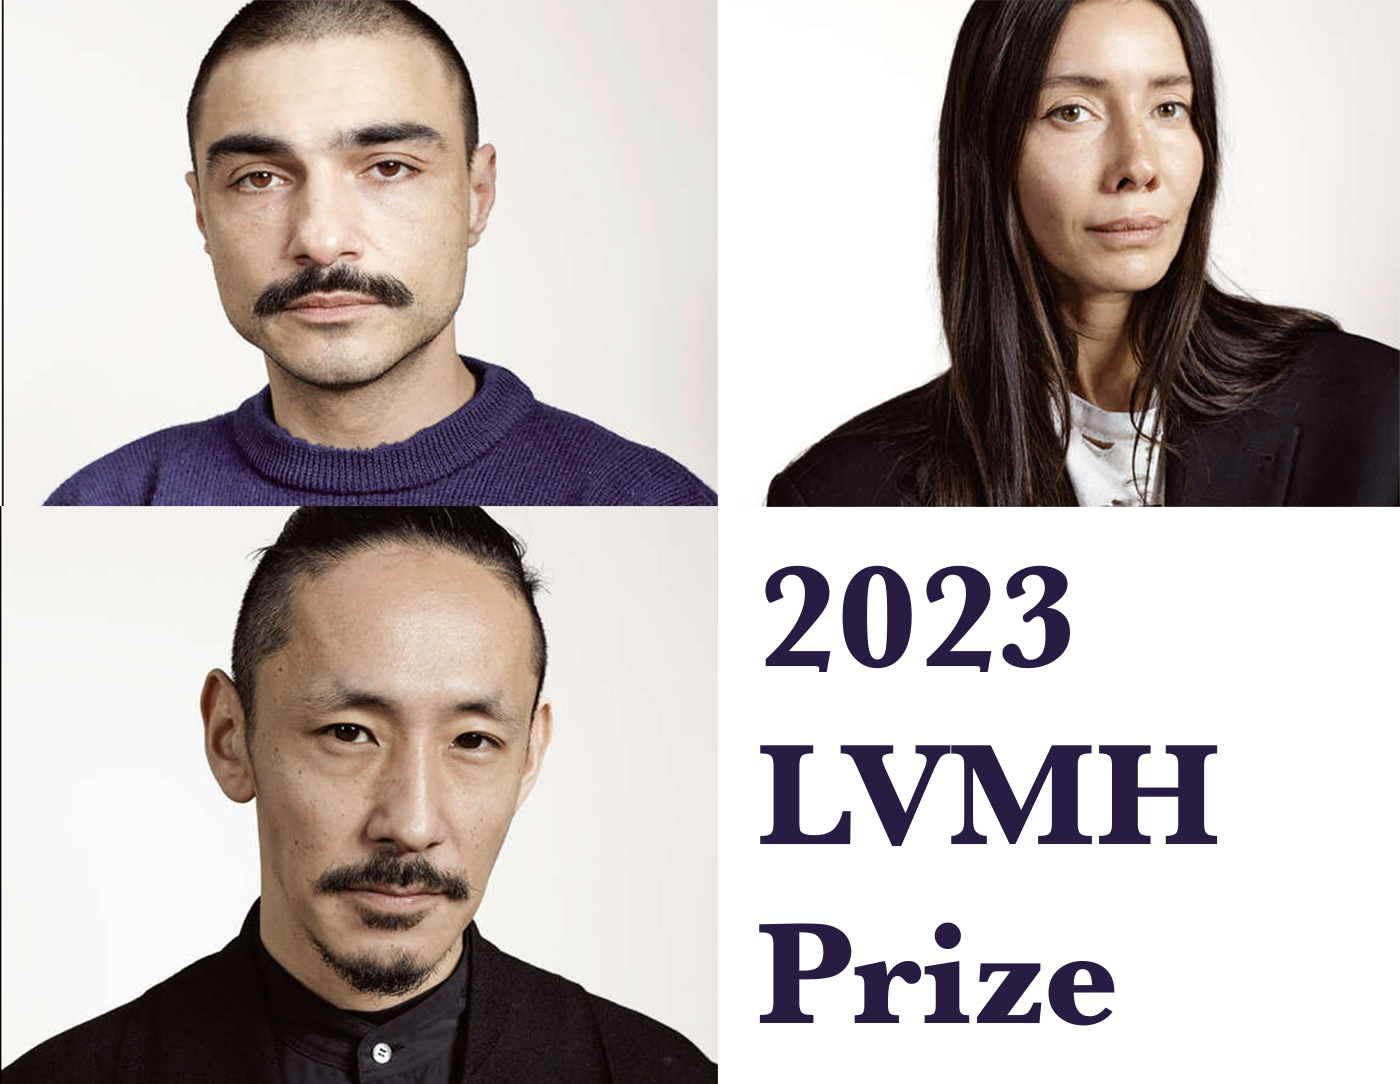 Emerging Designers Shine: Setchu by Satoshi Kuwata Takes Top Honors at 2023 LVMH Prize taking home a 400,000 Euros prize